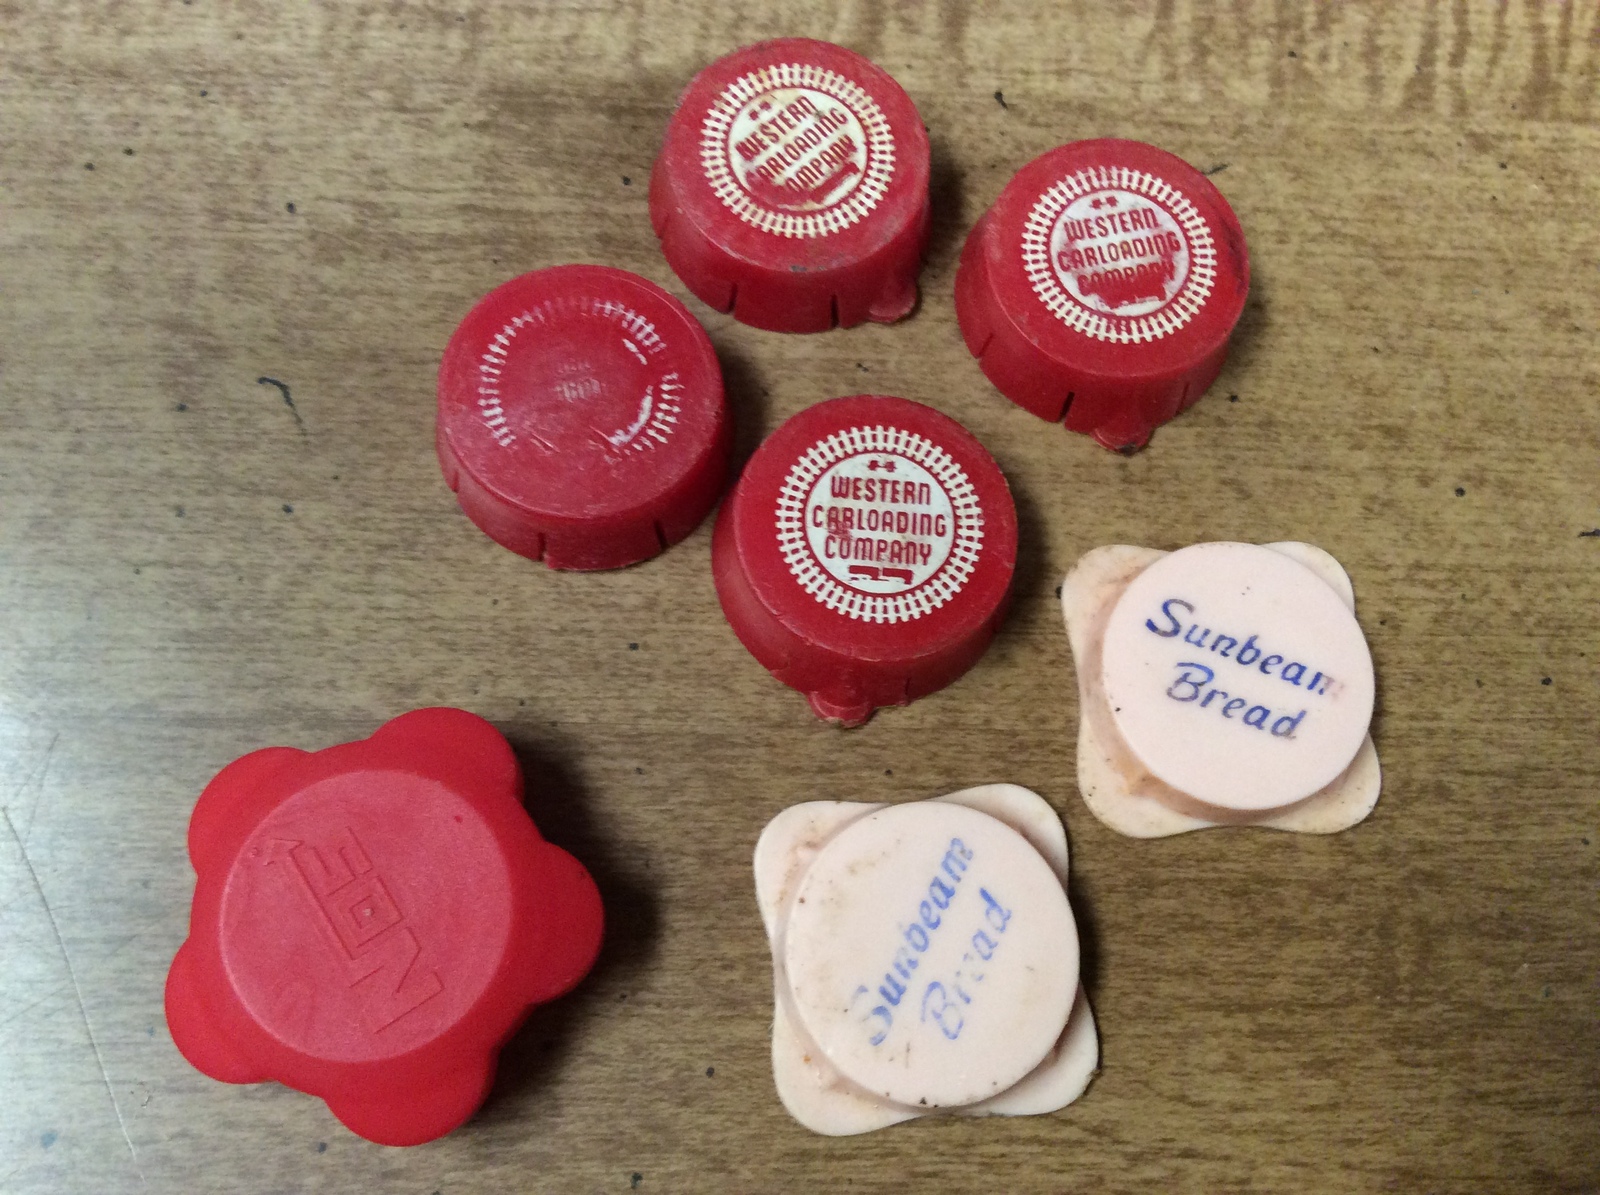 Primary image for Vintage Lot Snap On Bottle Caps Lids - Western Carloading Co., Sunbeam Bread